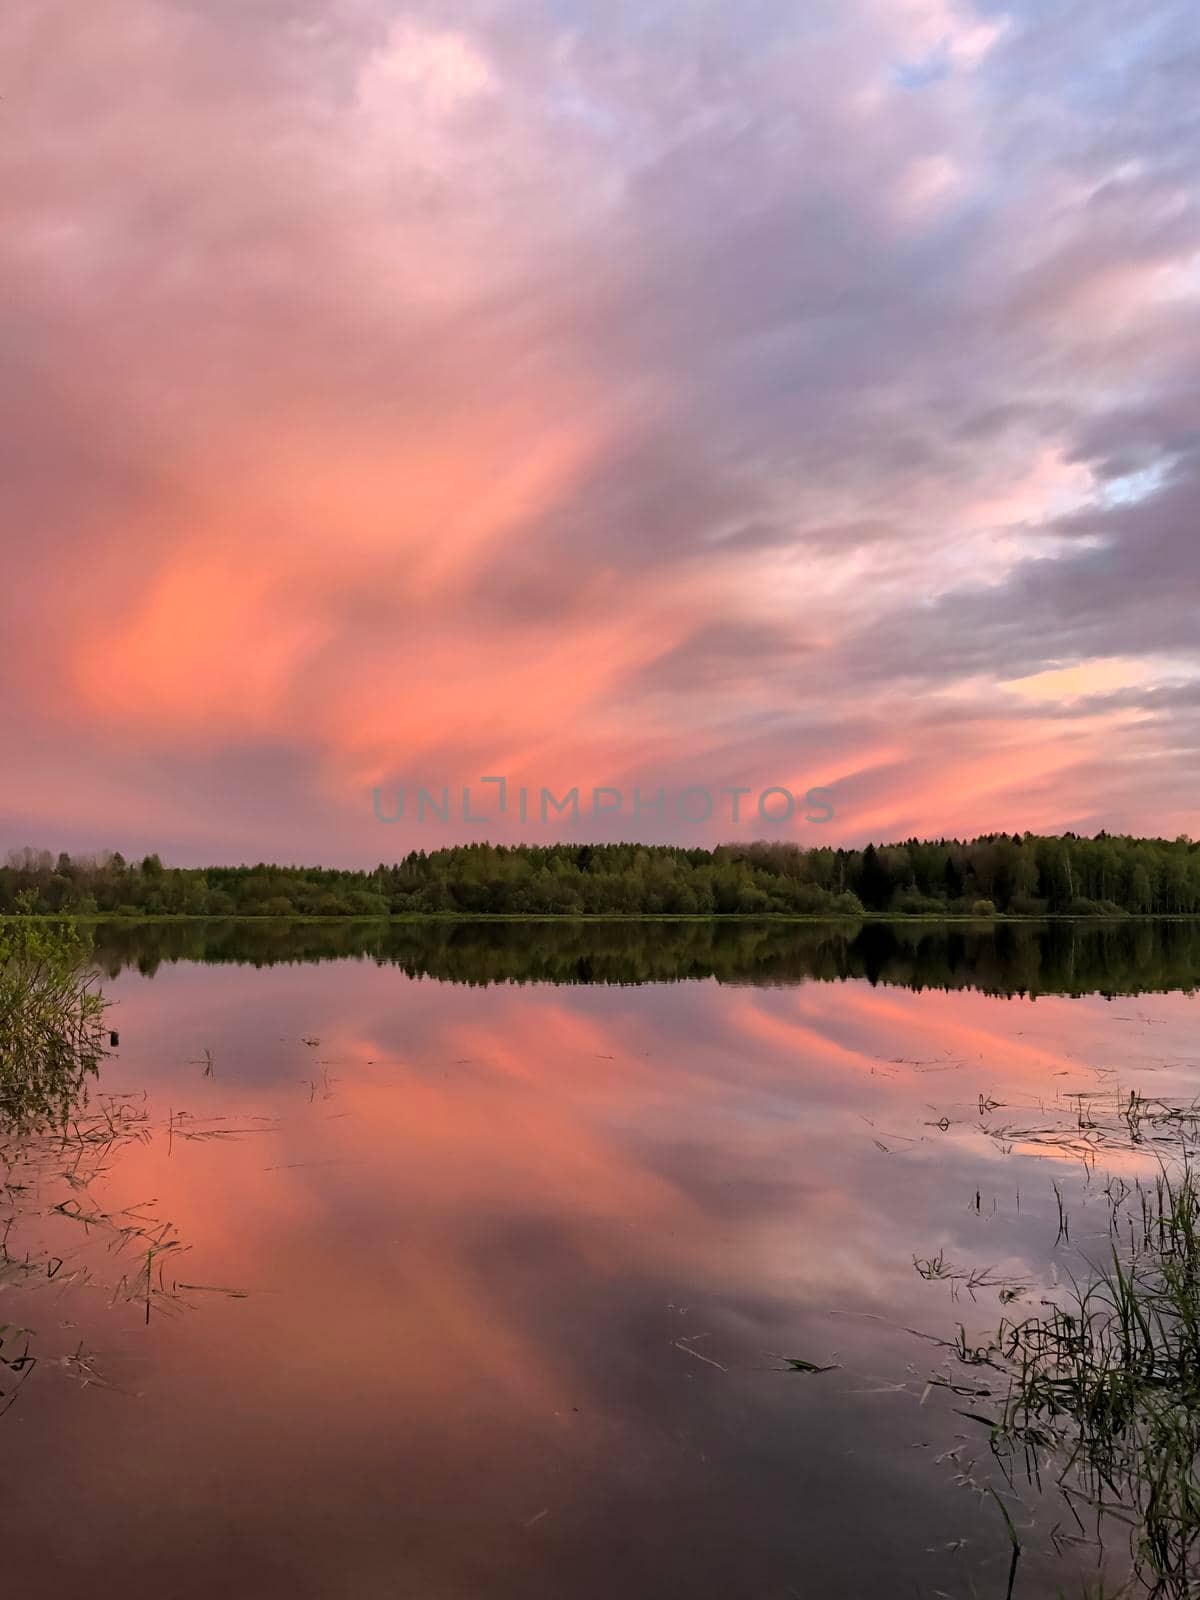 Dramatic sunset clouds over lake and trees - stock photo by kaliaevaen